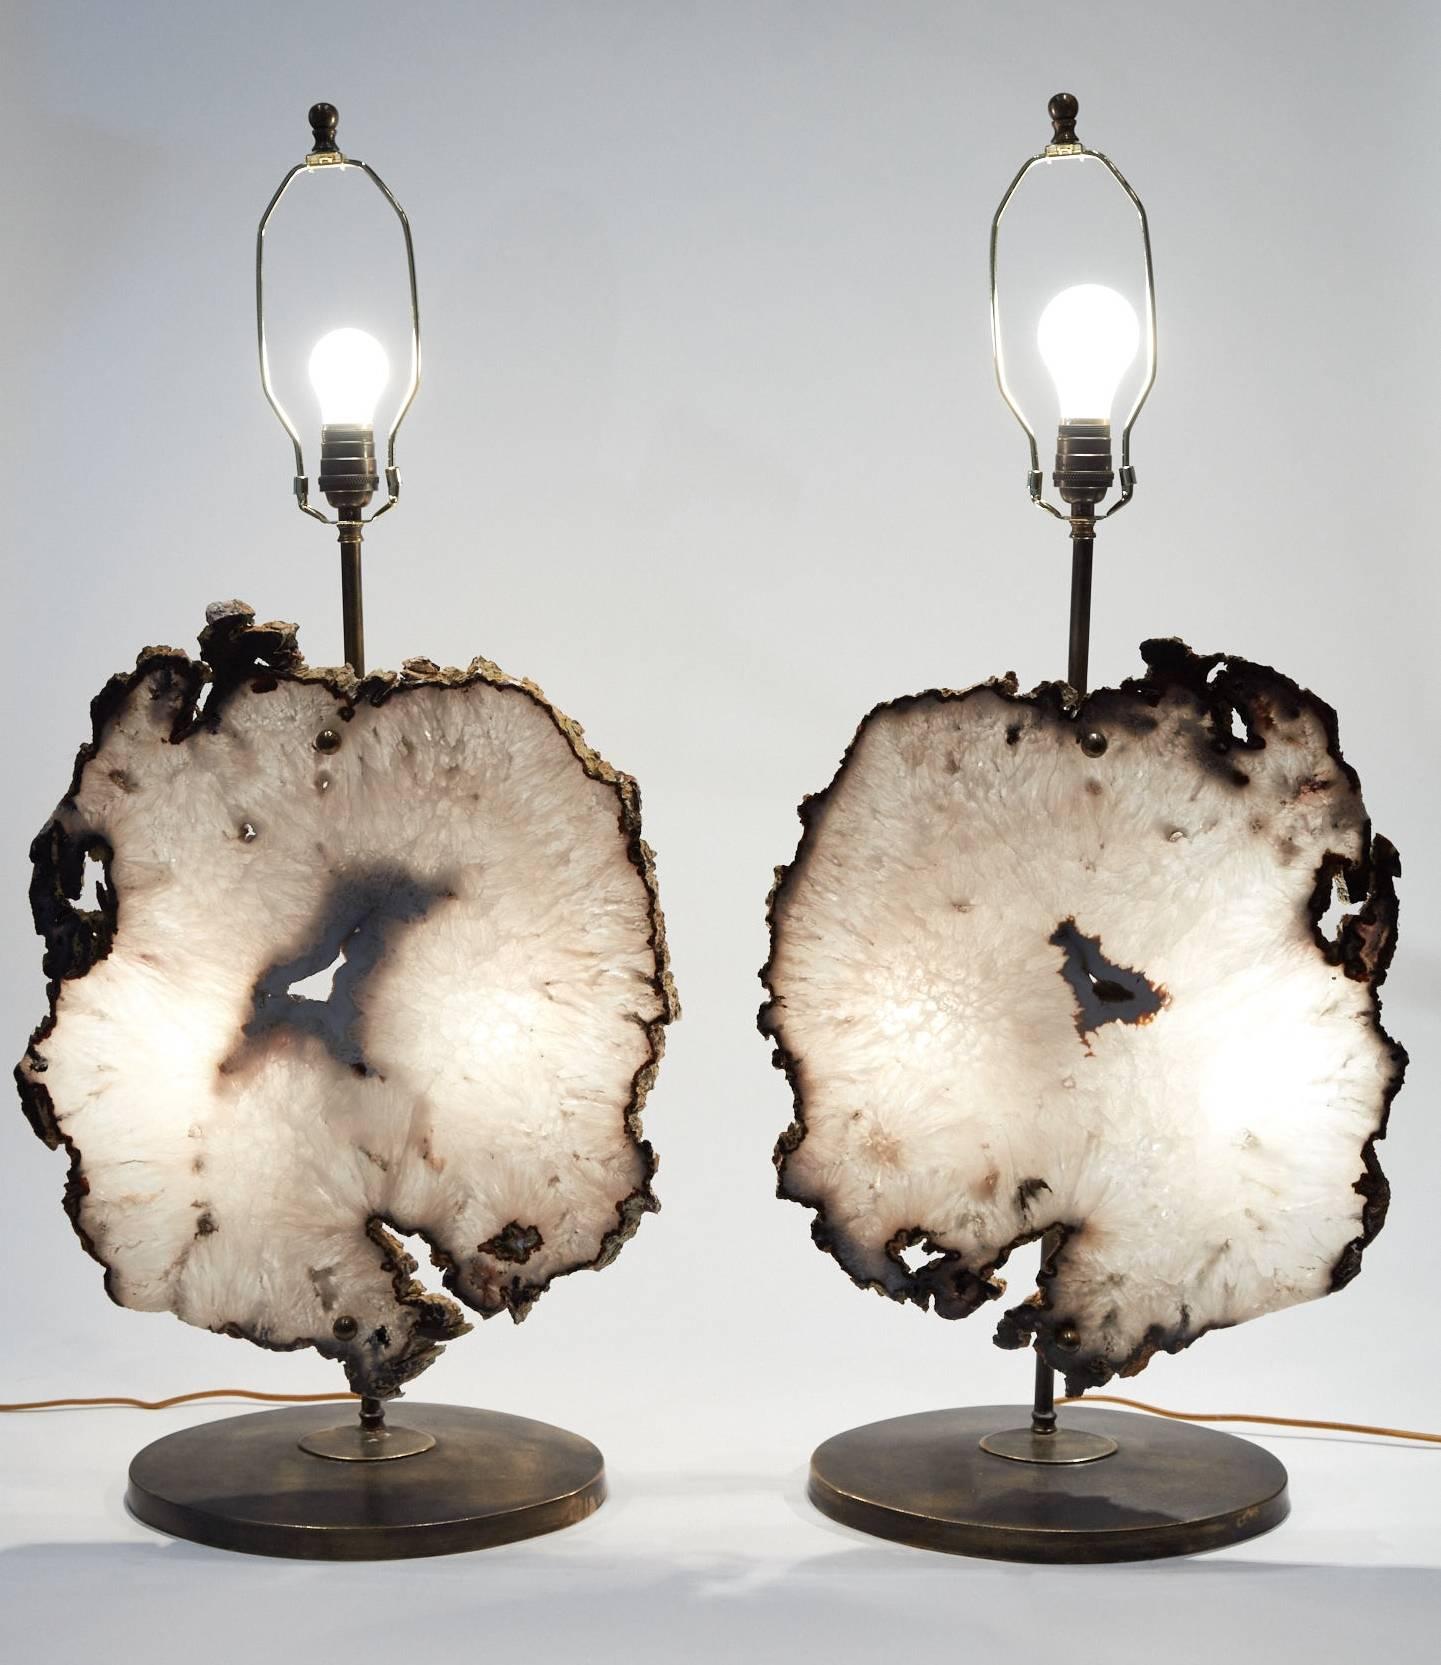 21st century of rare agate brass lamps
Brass is a pretty antiqued color and Agate pieces are authentic and extra large.
Newly made 



Dimensions: 34.5